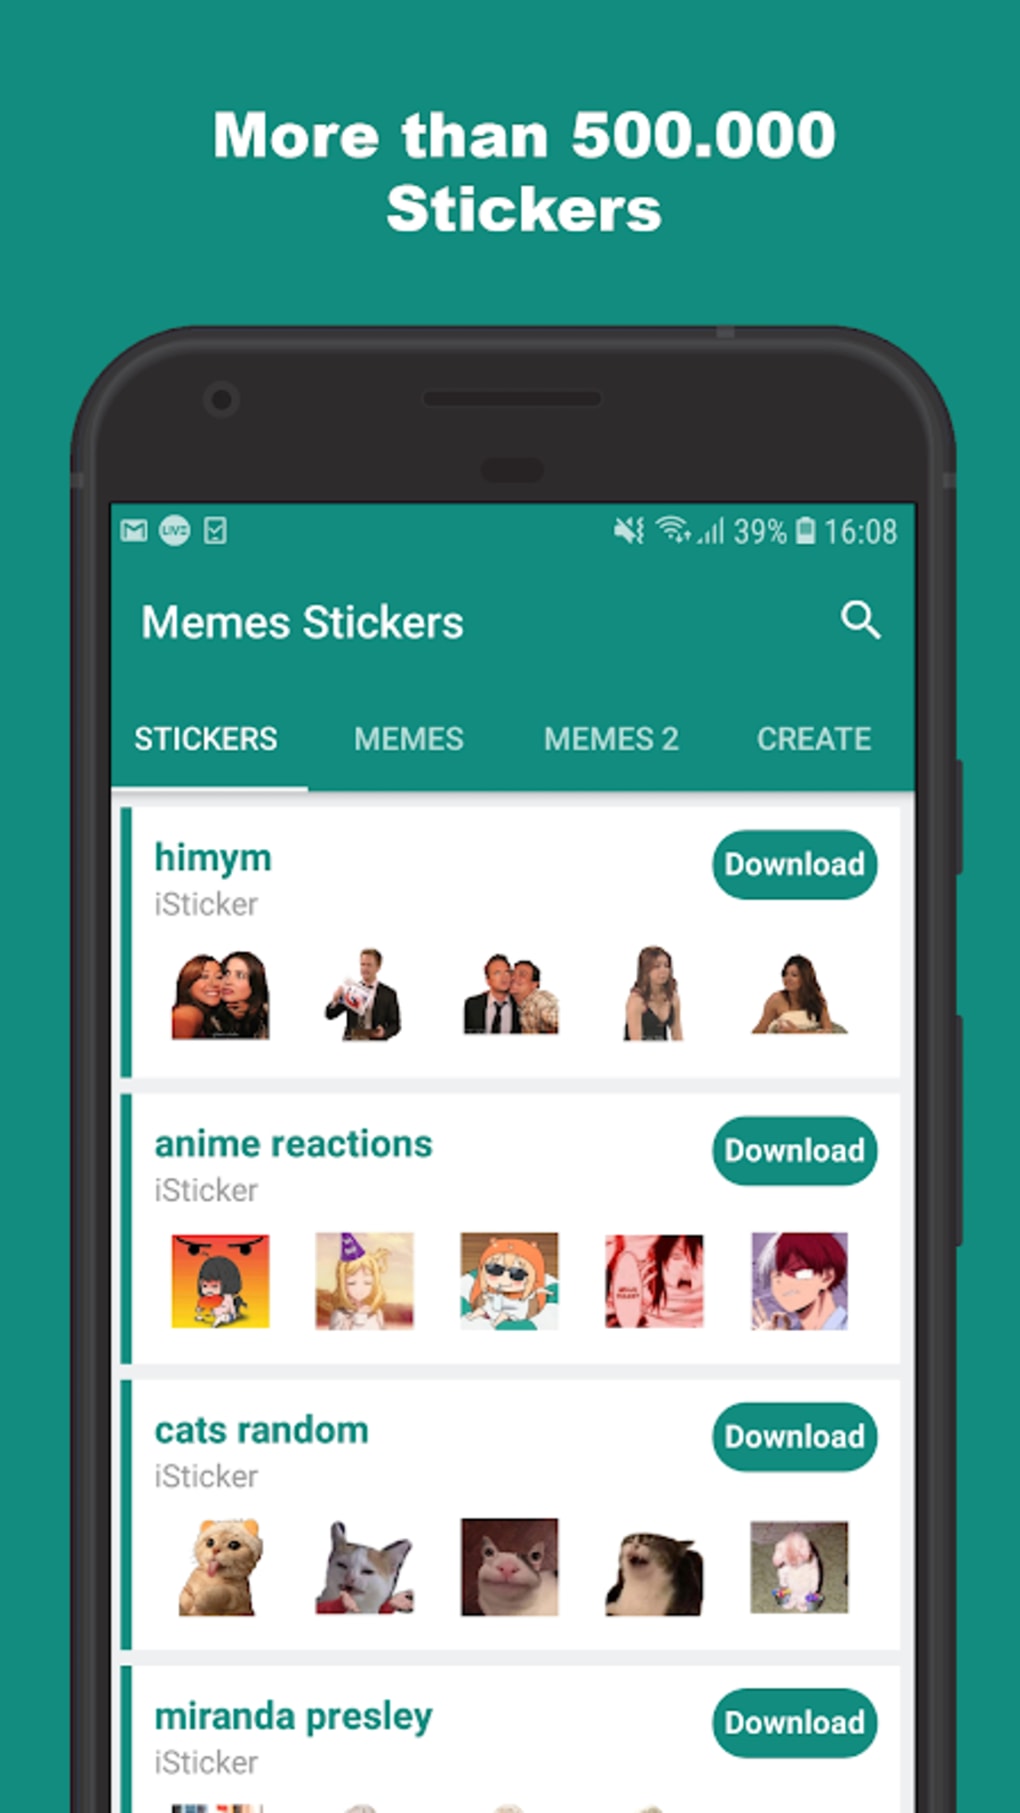 Animated Sticker Maker for WhatsApp WAStickerApps for Android - Download